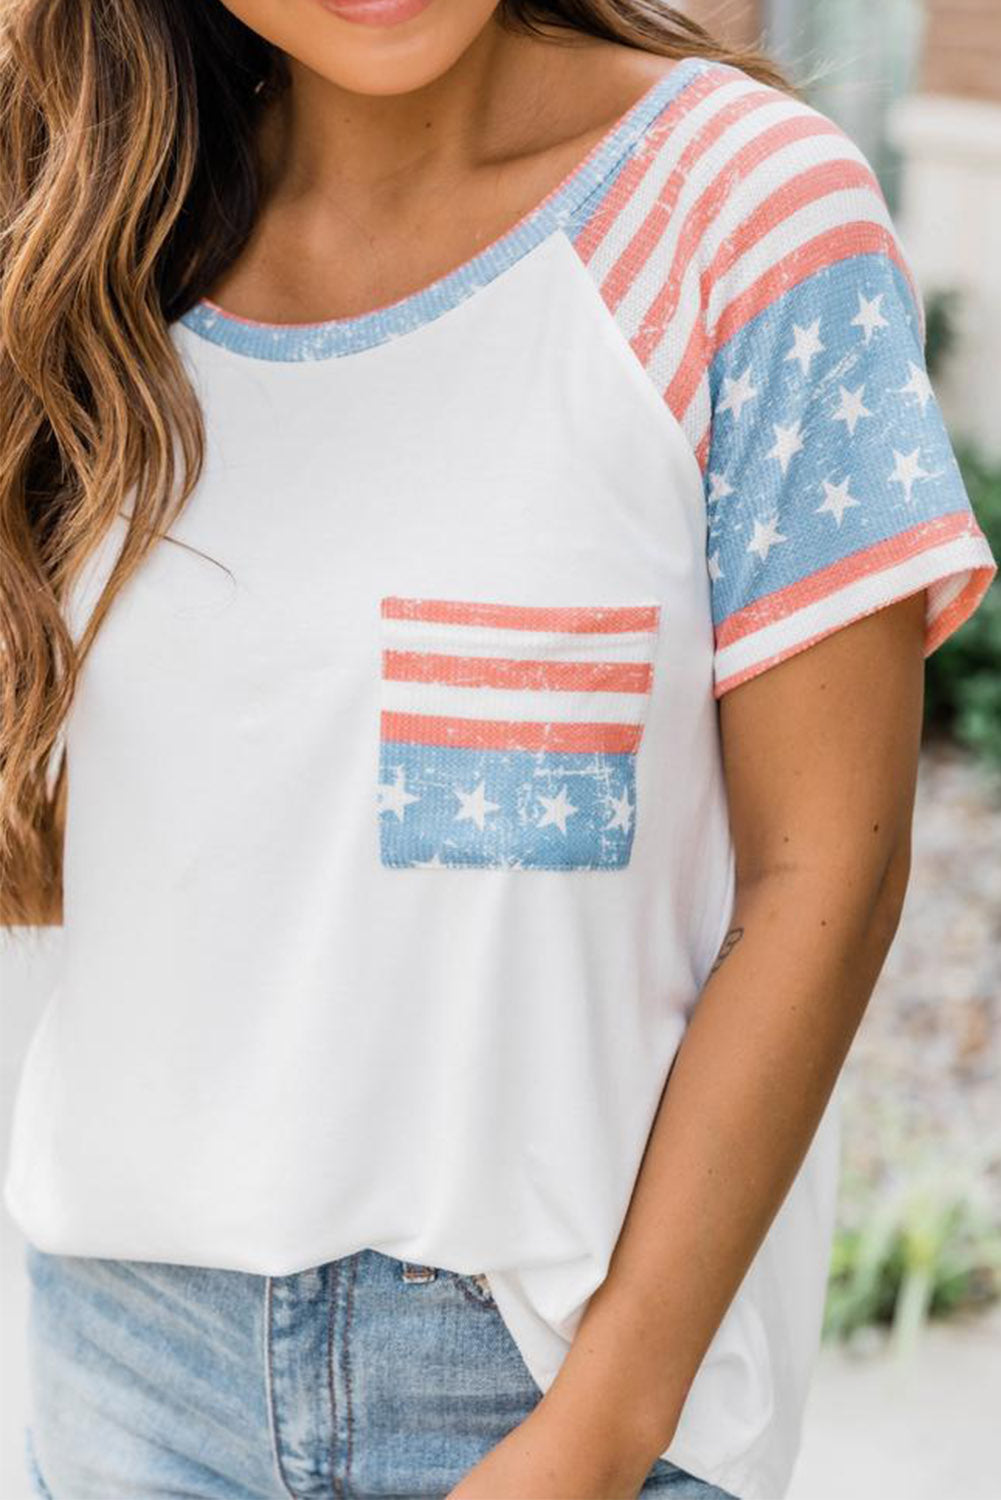 red white and blue flag shirts